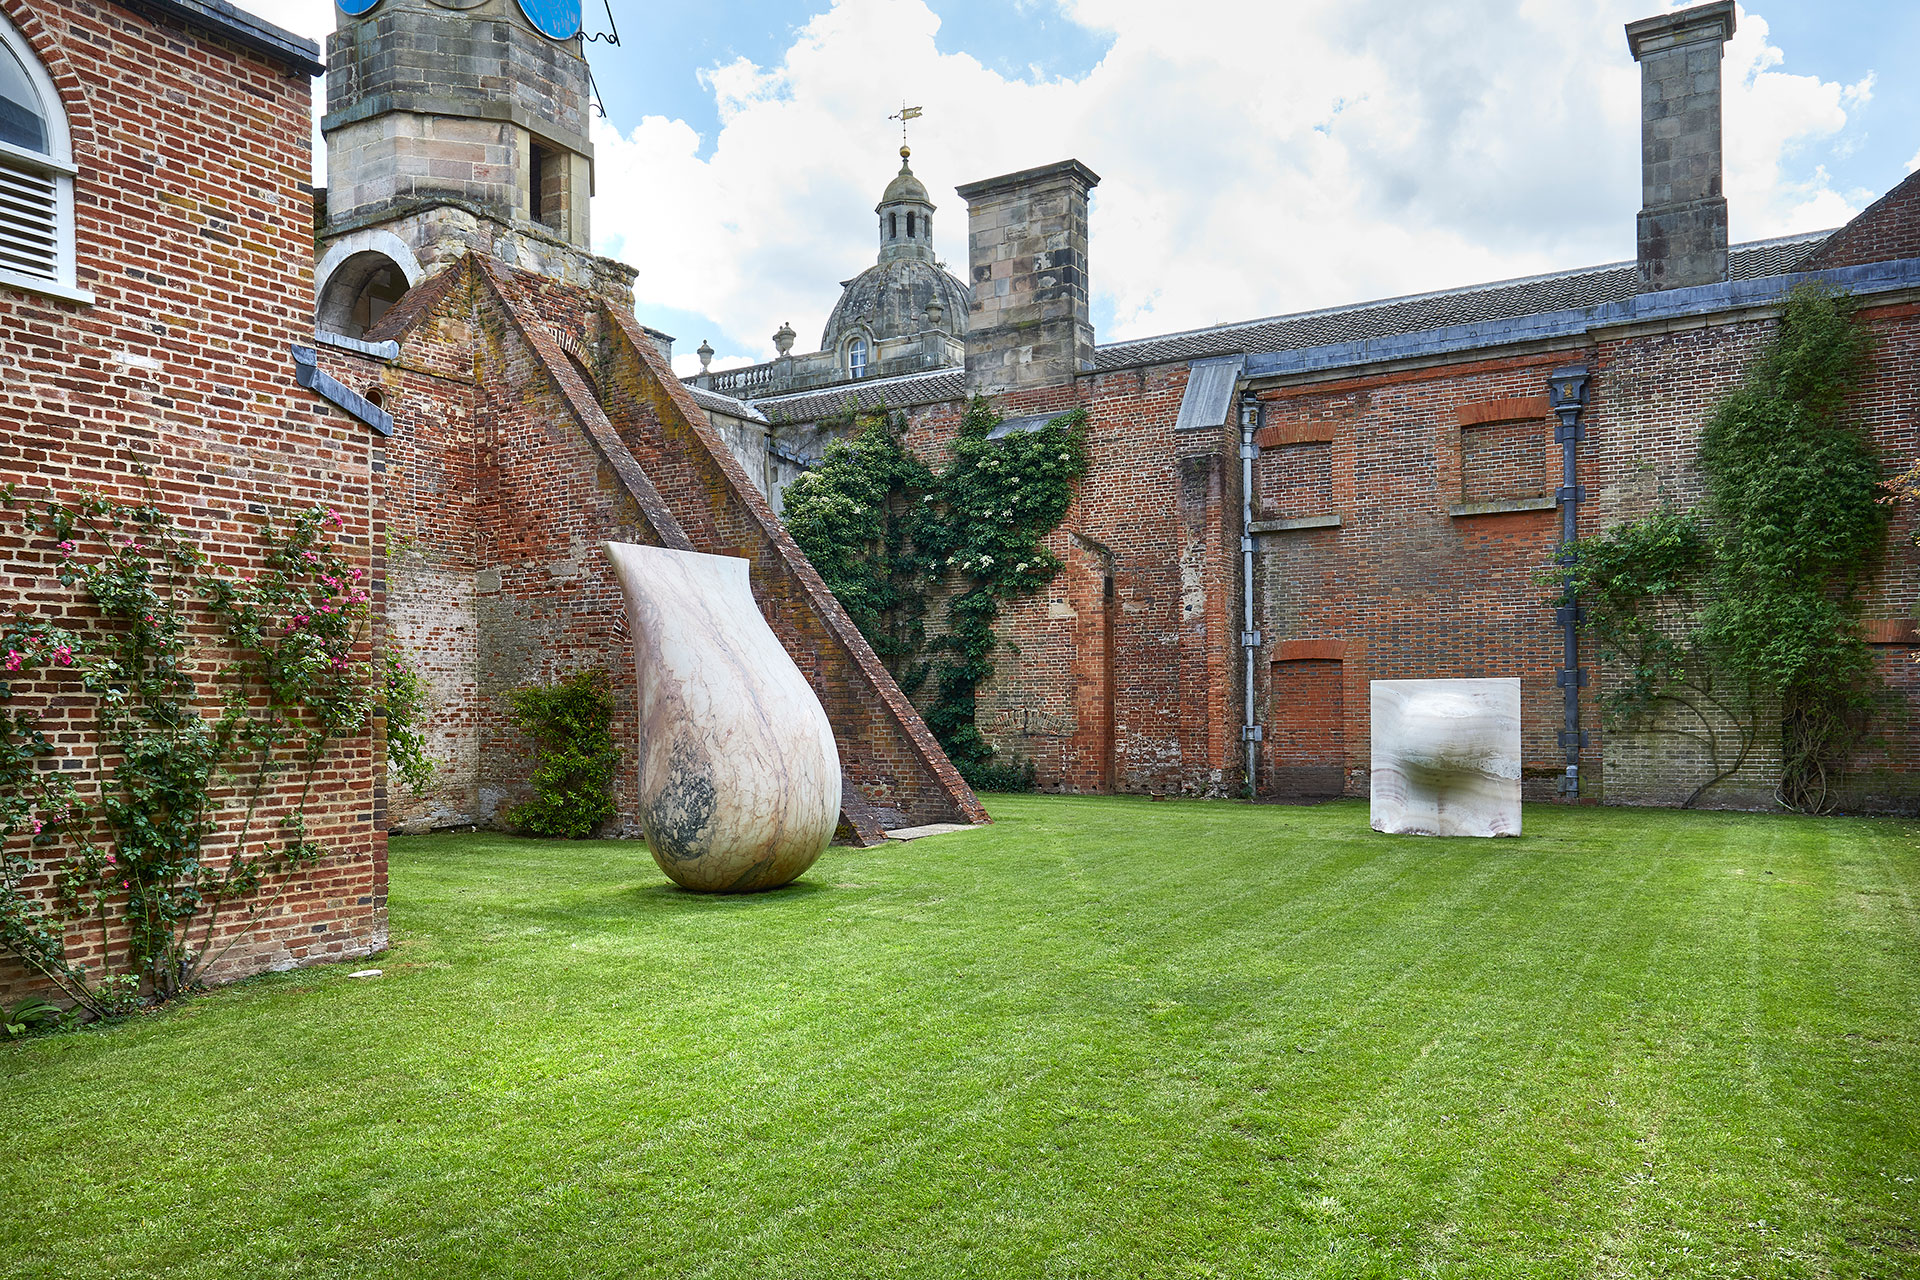 Exhibition view, Anish Kapoor at Houghton Hall. © Anish Kapoor. All rights reserved DACS, 2020. Photo by Pete Huggins.
Featured: Grace, 2004, marble. Courtesy the artist and Lisson Gallery. Imminence, 2000, onyx. Courtesy the artist.